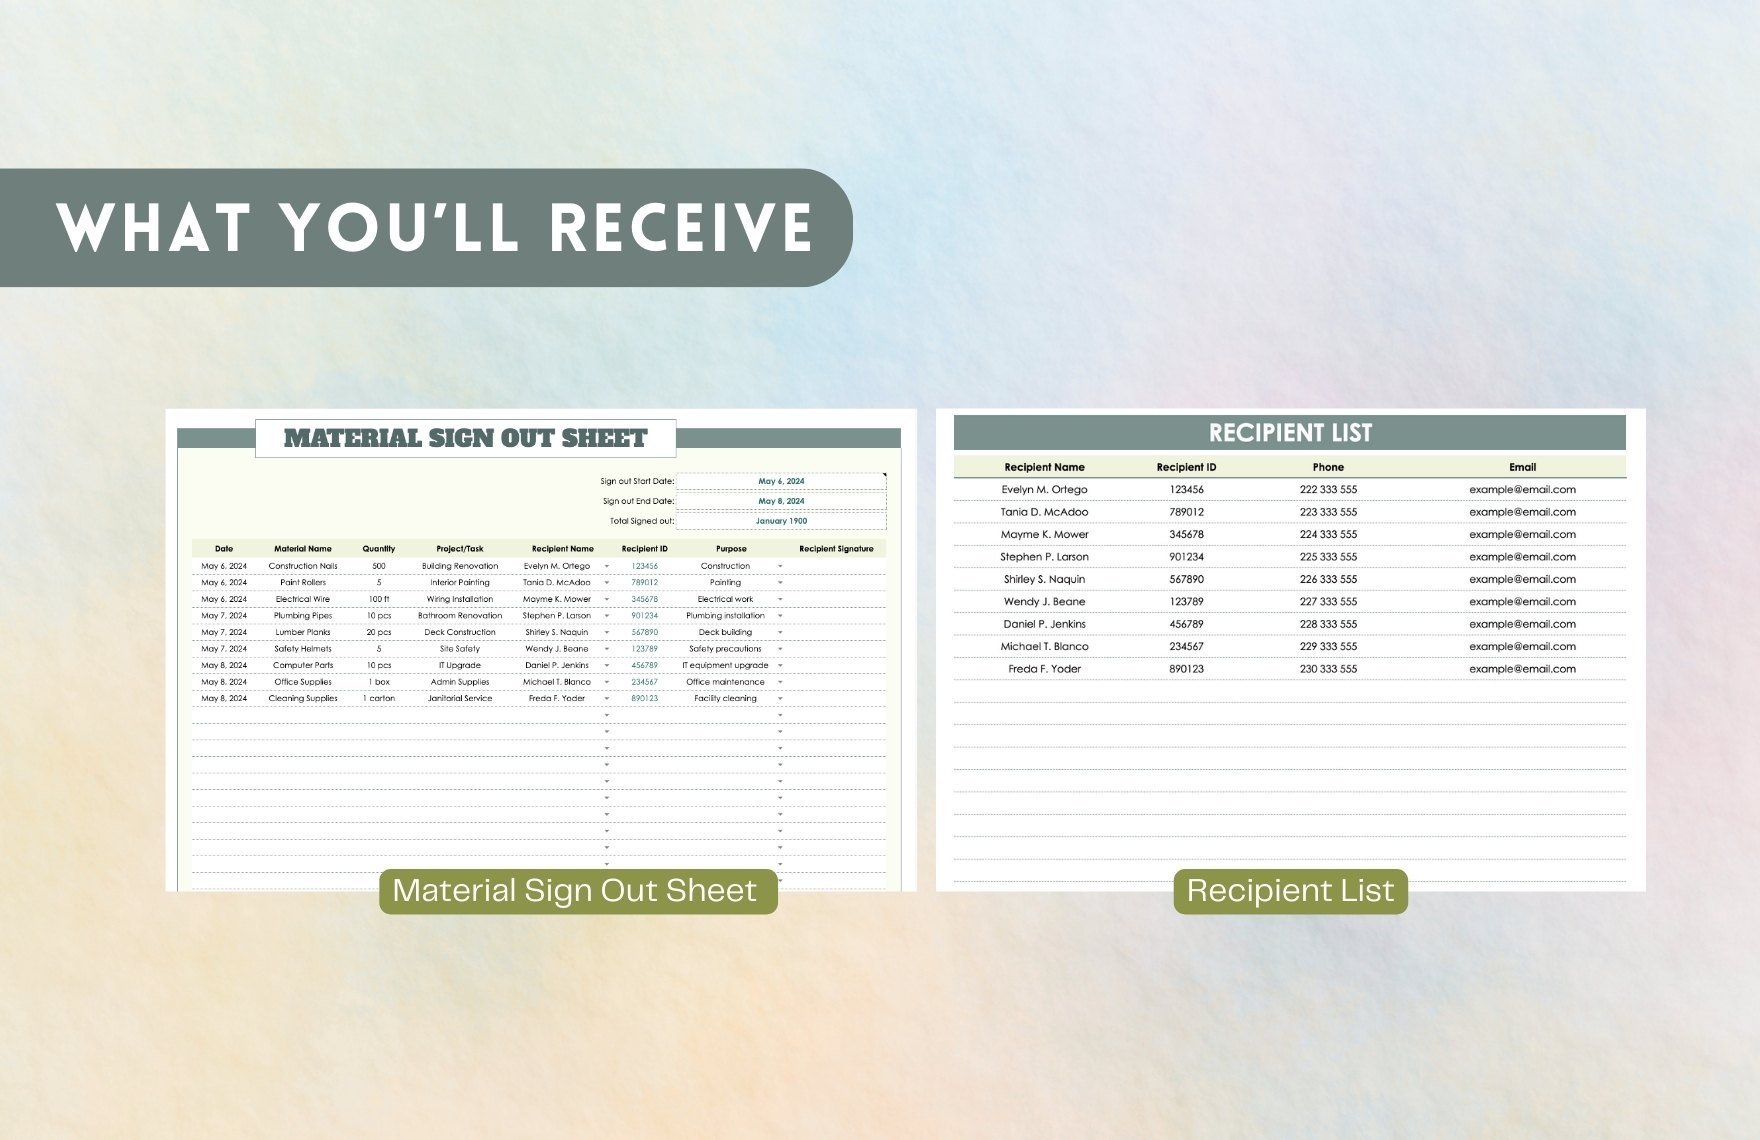 Material Sign Out Sheet Template